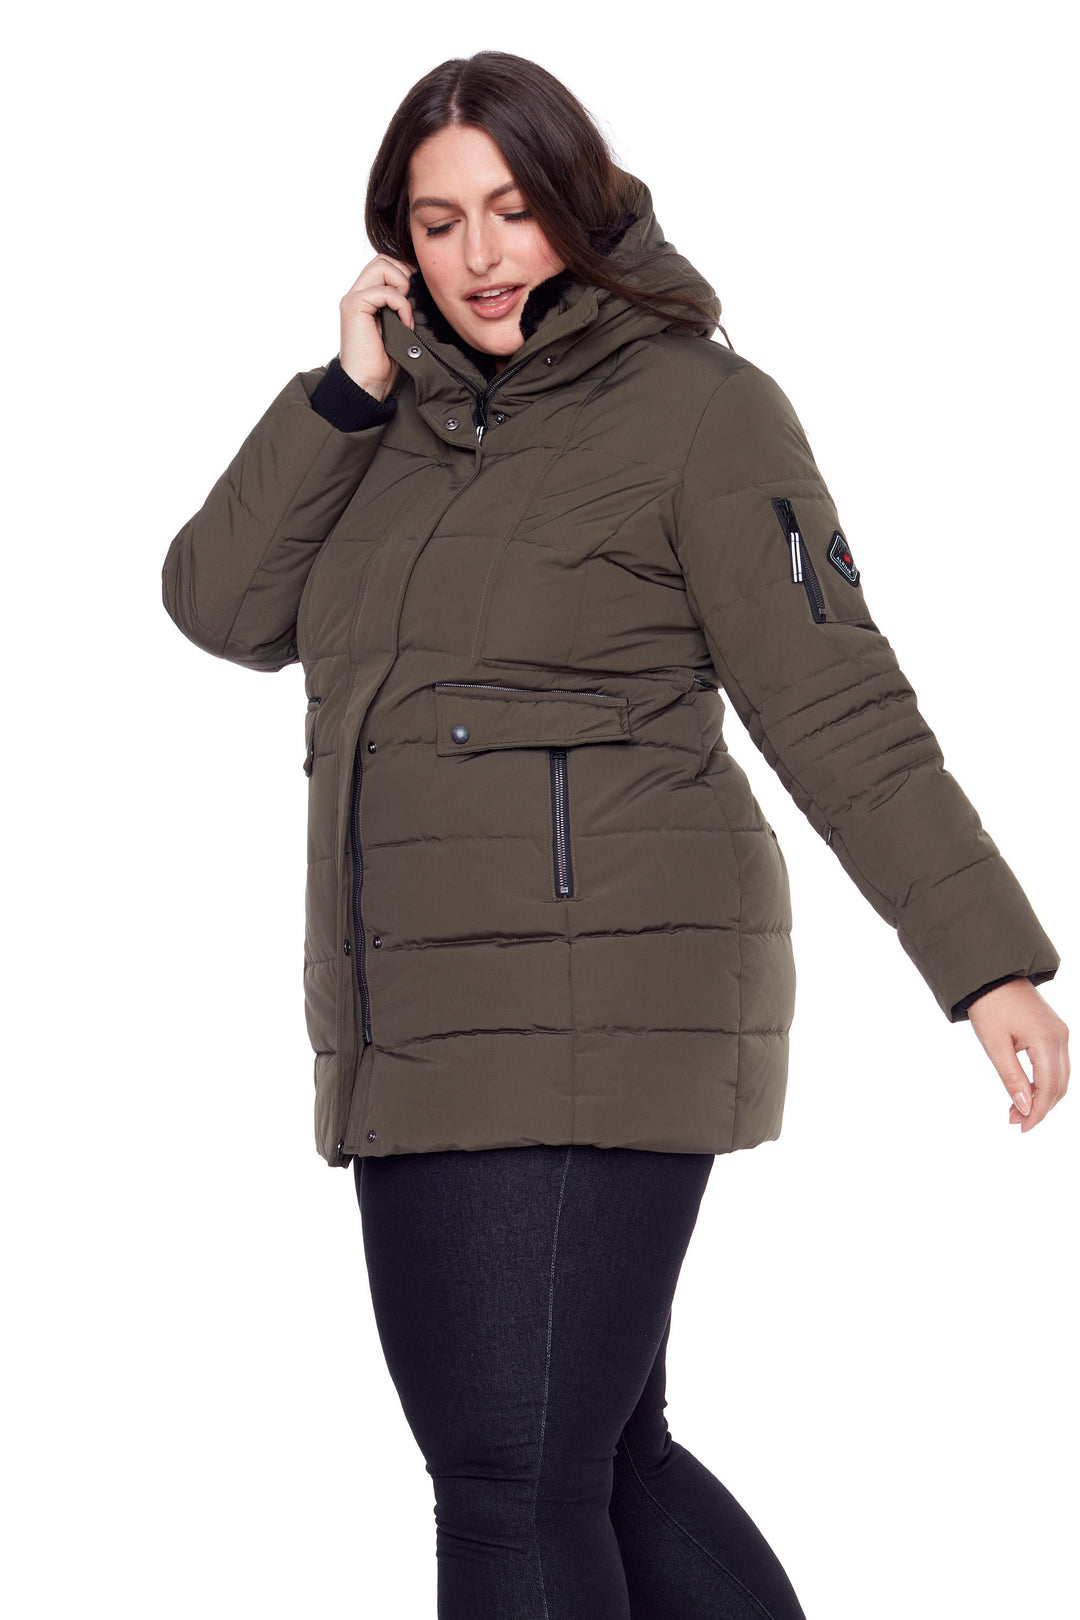 KOOTNEY PLUS | WOMEN'S VEGAN DOWN (RECYCLED) MID-LENGTH PARKA, OLIVE (PLUS SIZE)